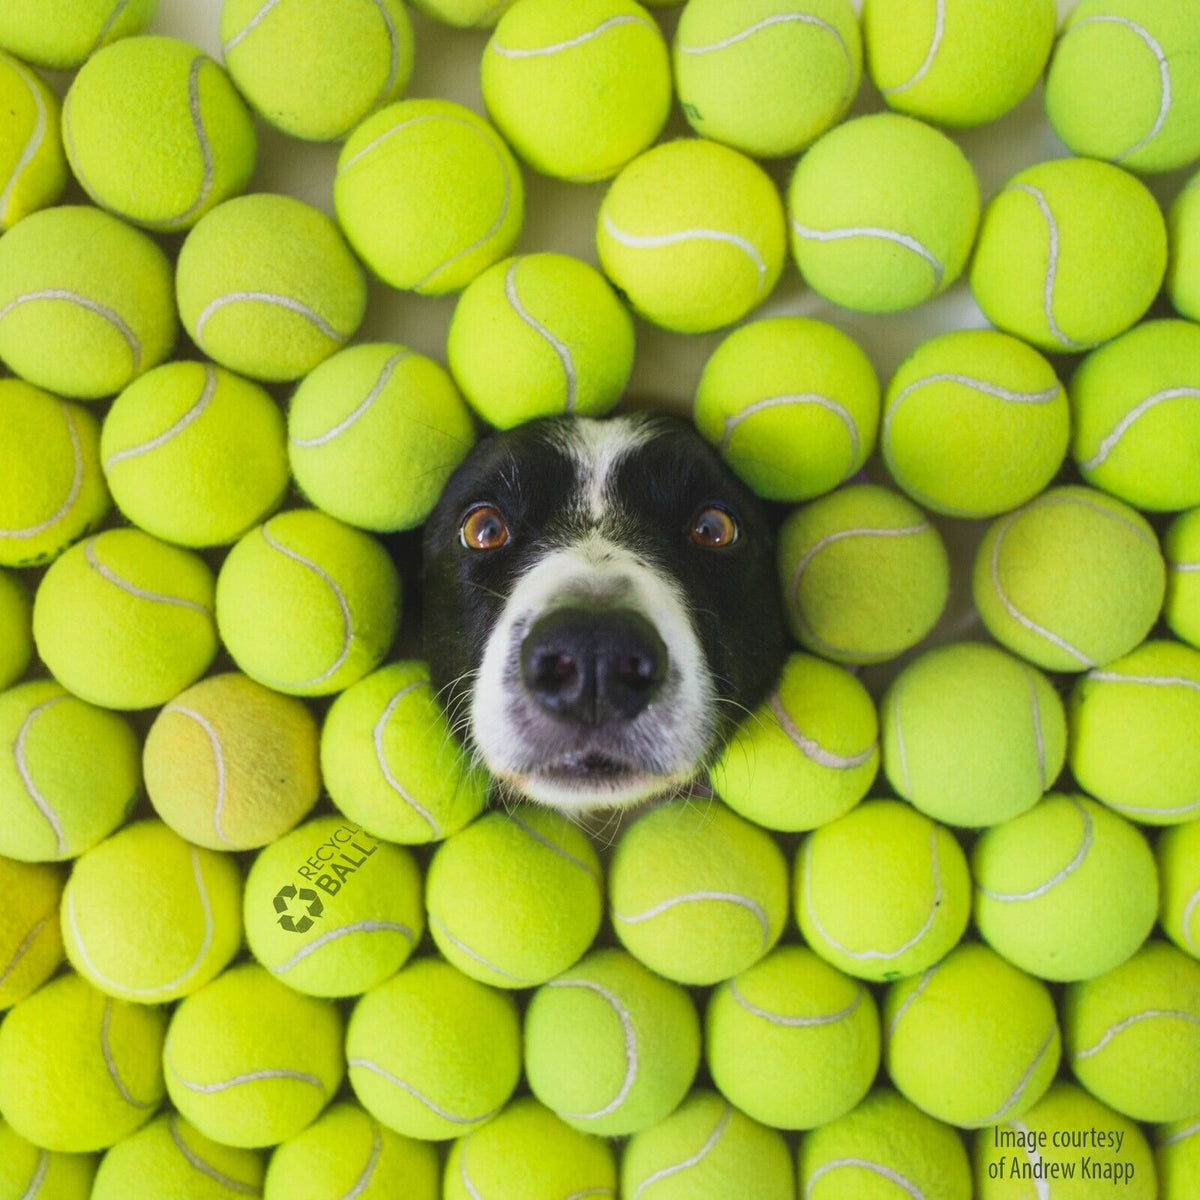 WOW 41 INDOOR USED TENNIS BALLS-GIFT FOR YOUR DOG DOGS XMAS 